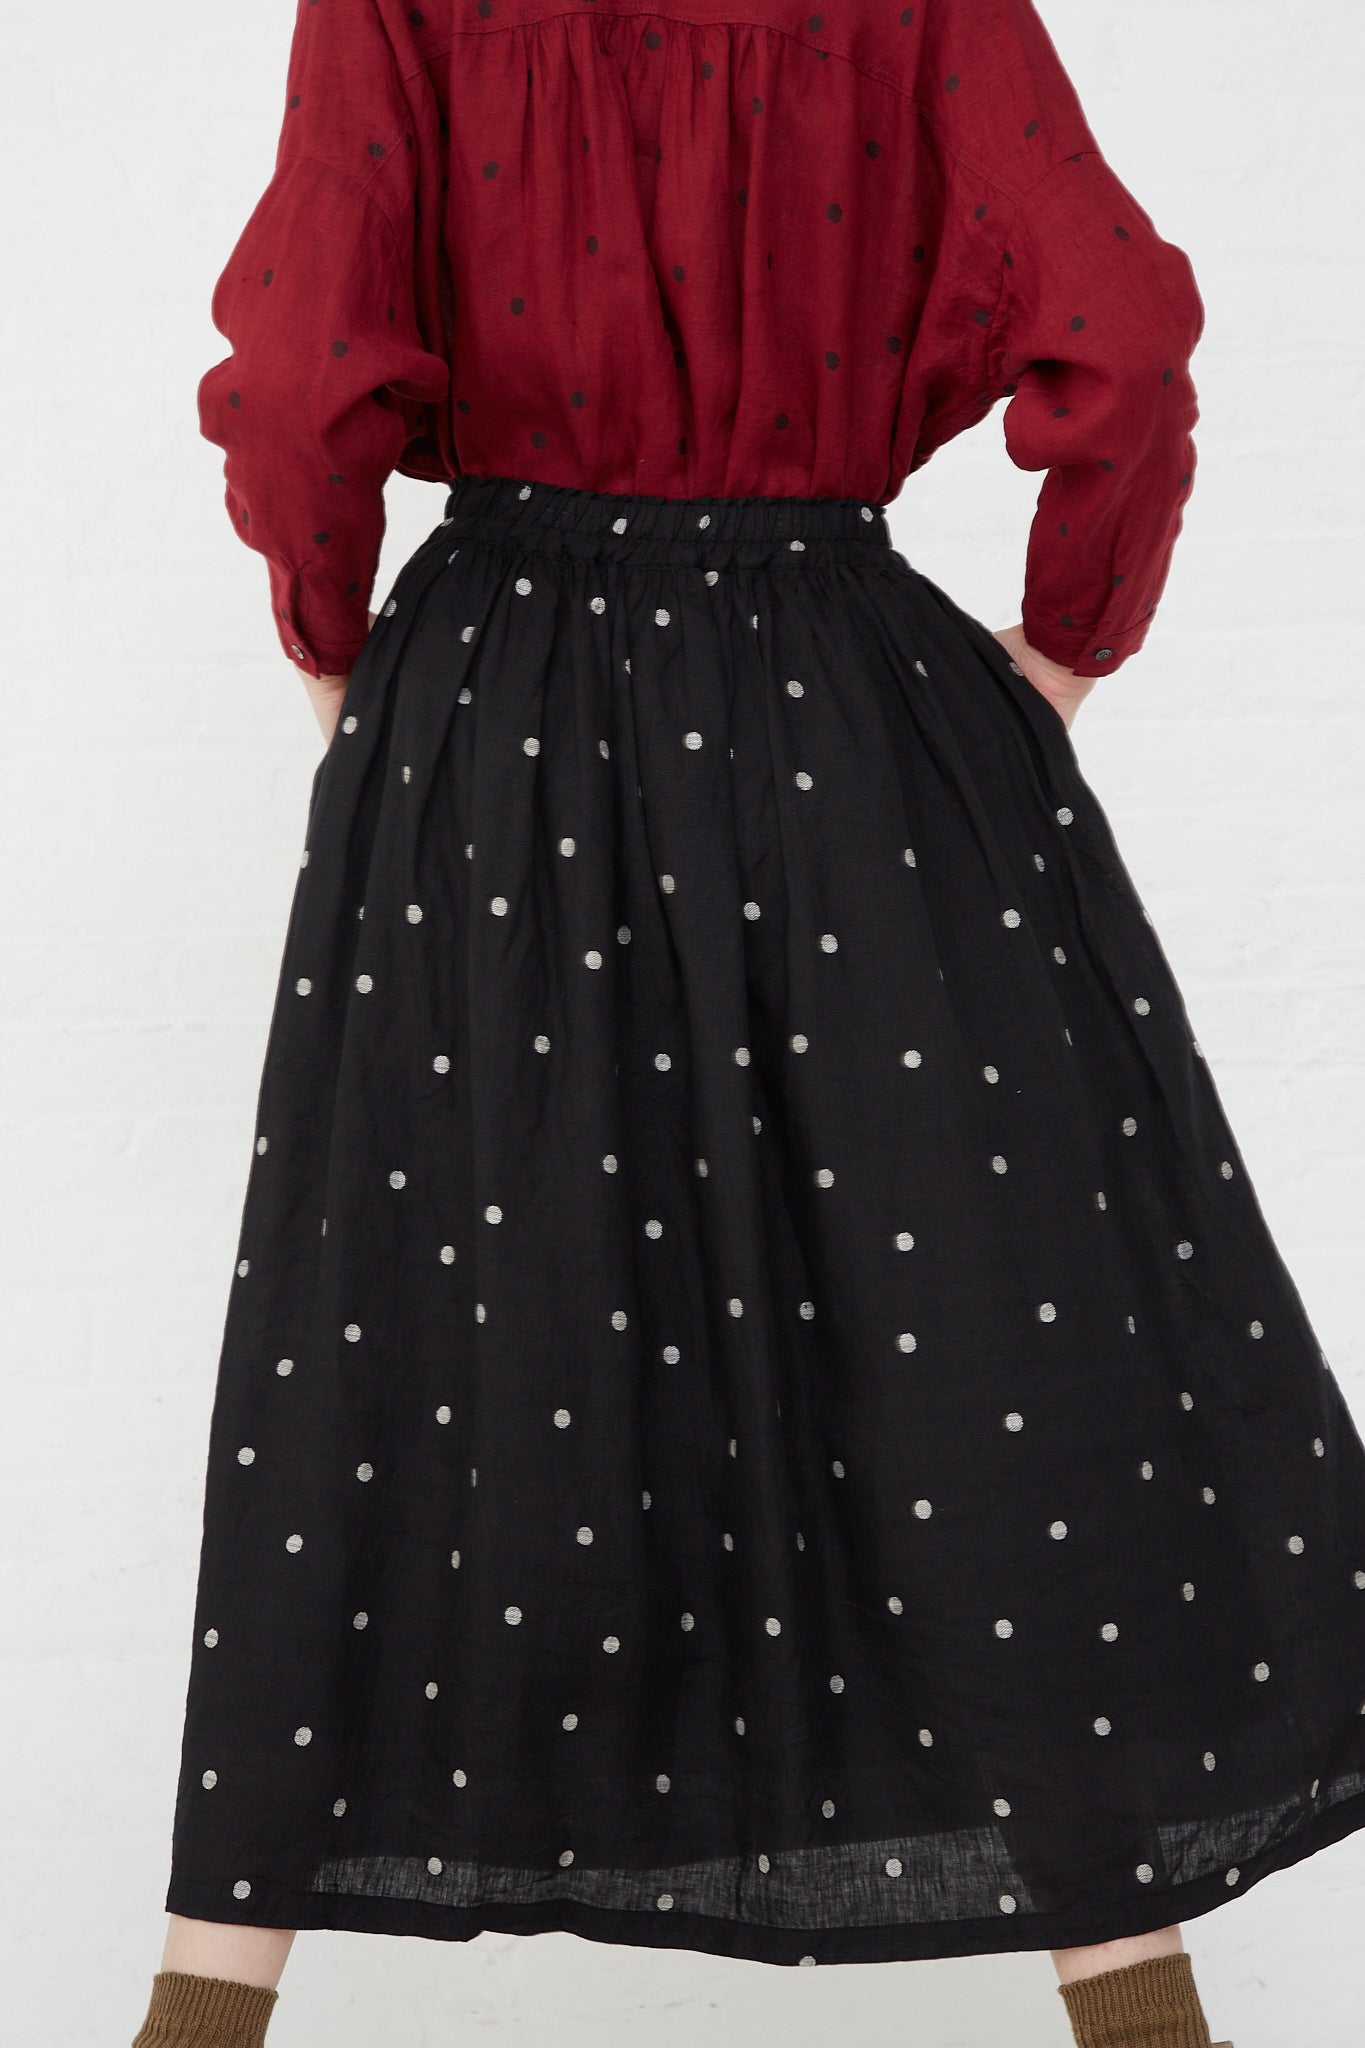 The back of a woman wearing an Ichi Antiquités Linen Dot Skirt in Black and Natural with an elasticated waist.